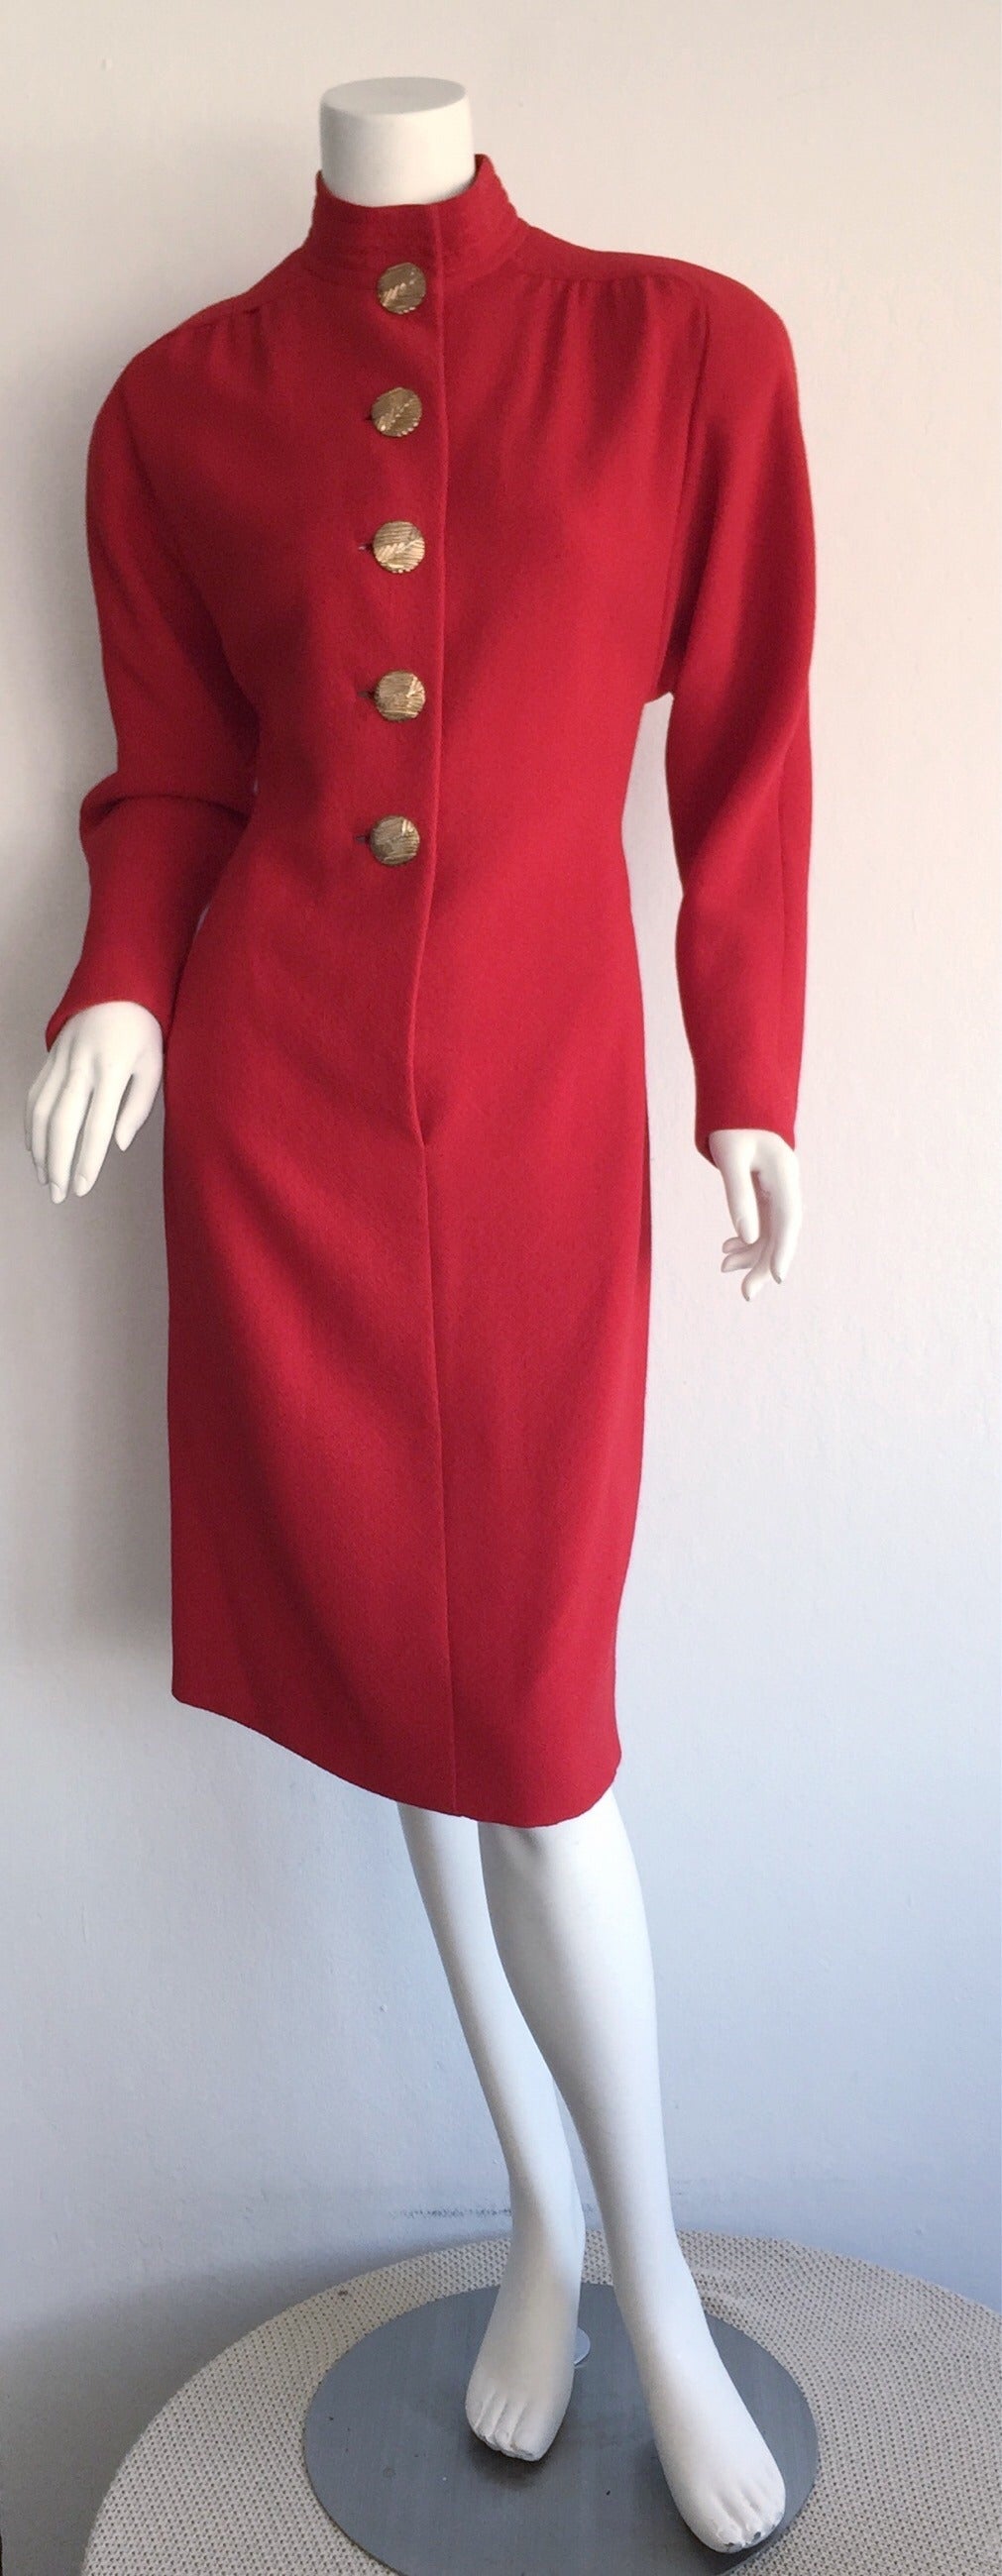 Gorgeous vintage James Galanos lipstick red dress! Intricate amount of detail Galanos was renowned for. Elegant long sleeves, with functional gold hammered buttons up the bodice. Looks great buttoned all the way up, or left partially opened. Also,